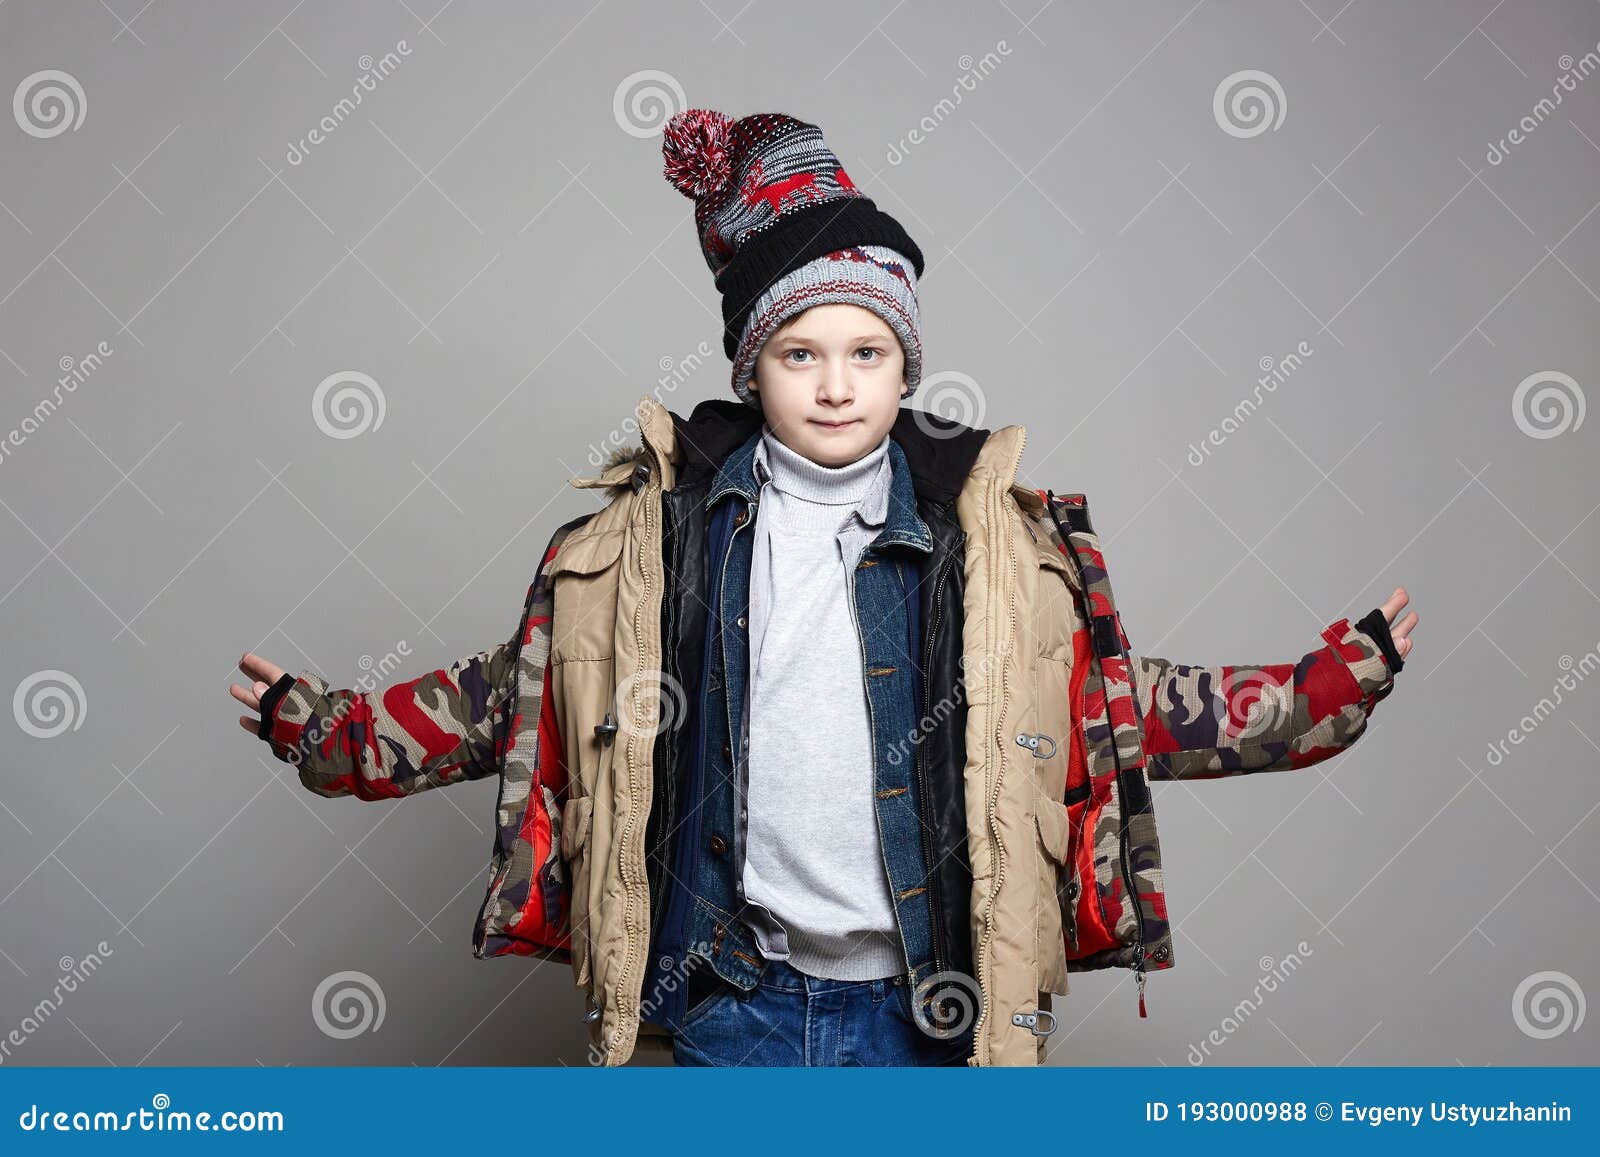 Kid Wore All His Clothes. Funny Boy in Winter Outerwear Stock ...